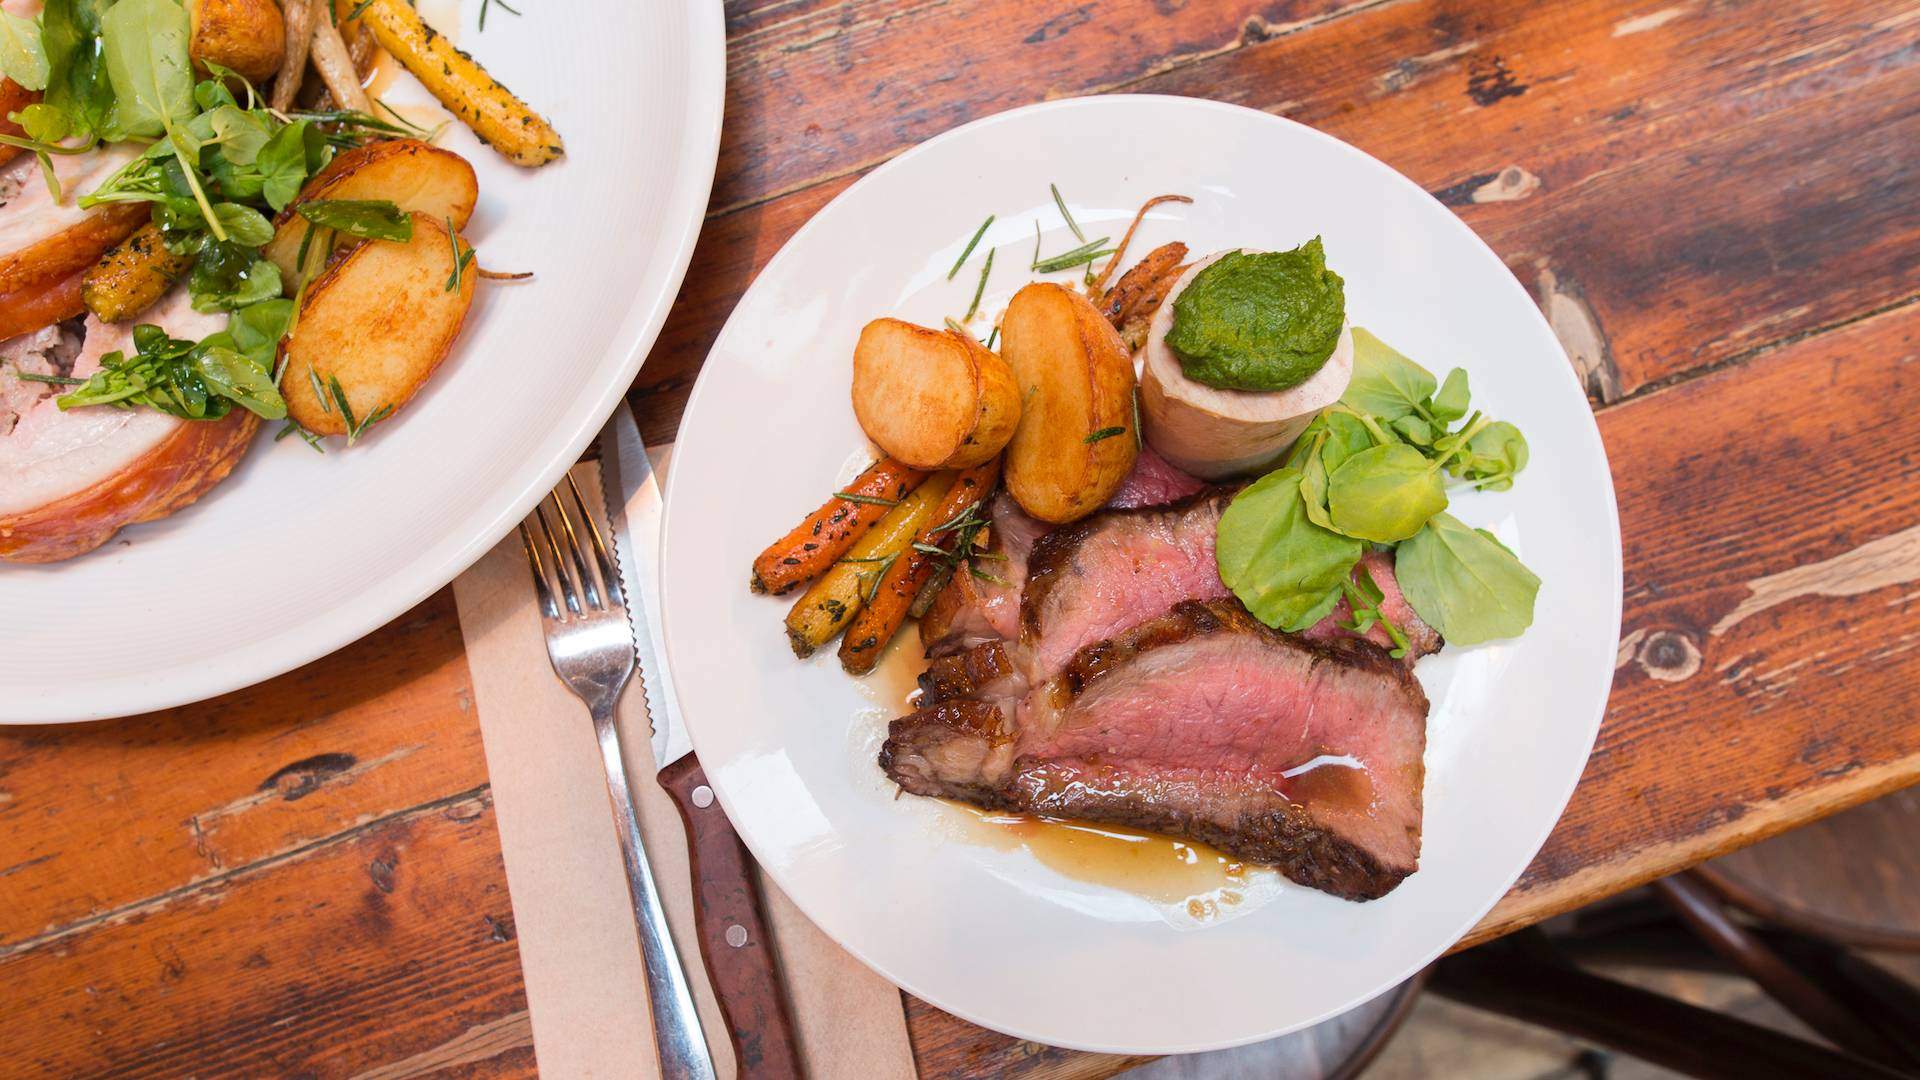 The Local Taphouse - best Sunday roasts in St Kilda, Melbourne.